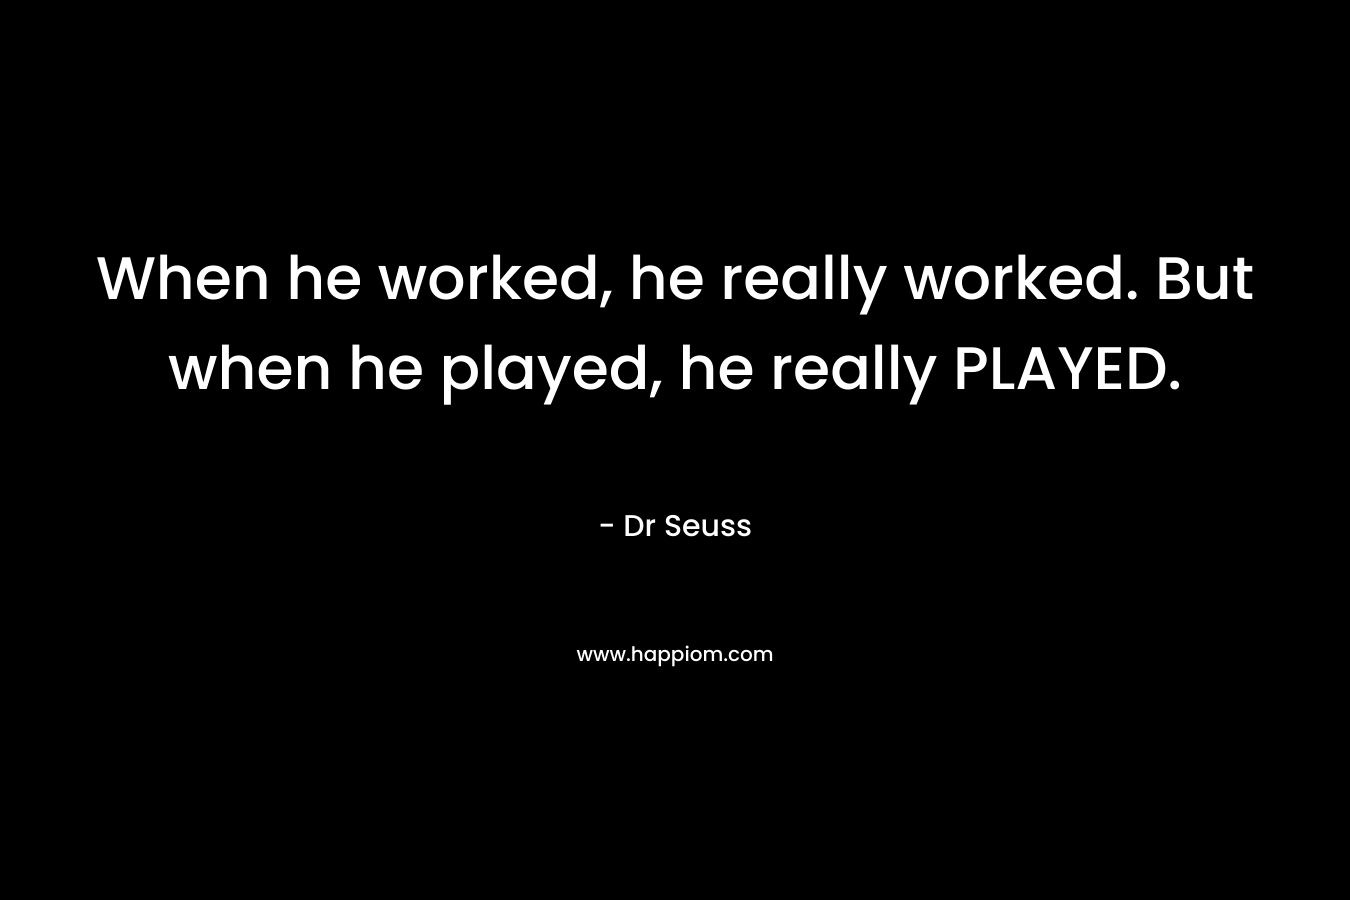 When he worked, he really worked. But when he played, he really PLAYED.